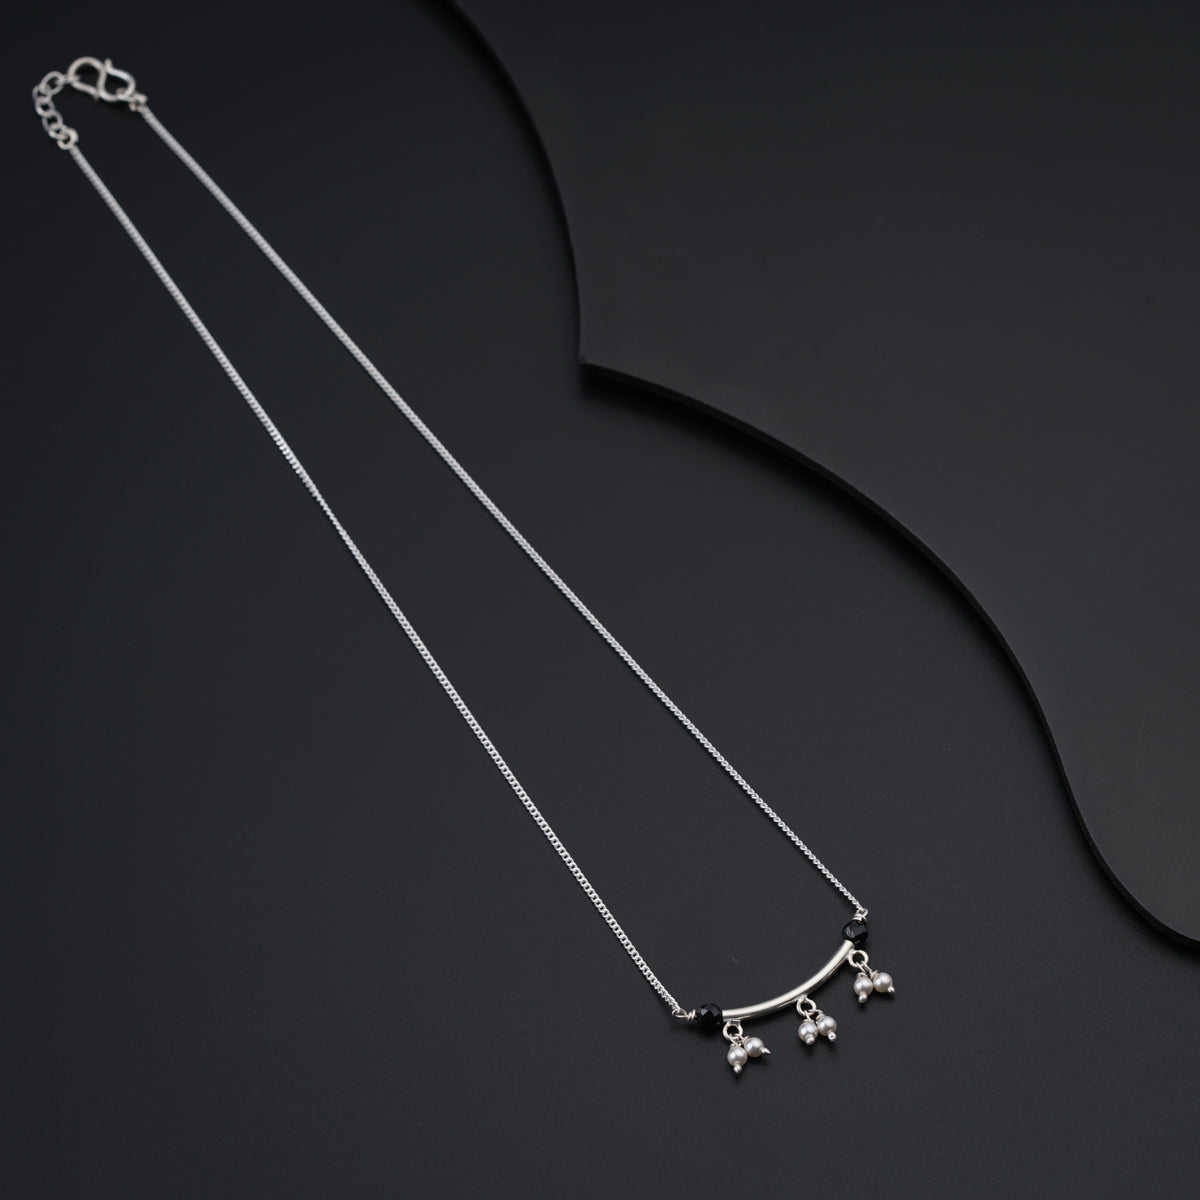 a pair of silver necklaces on a black surface